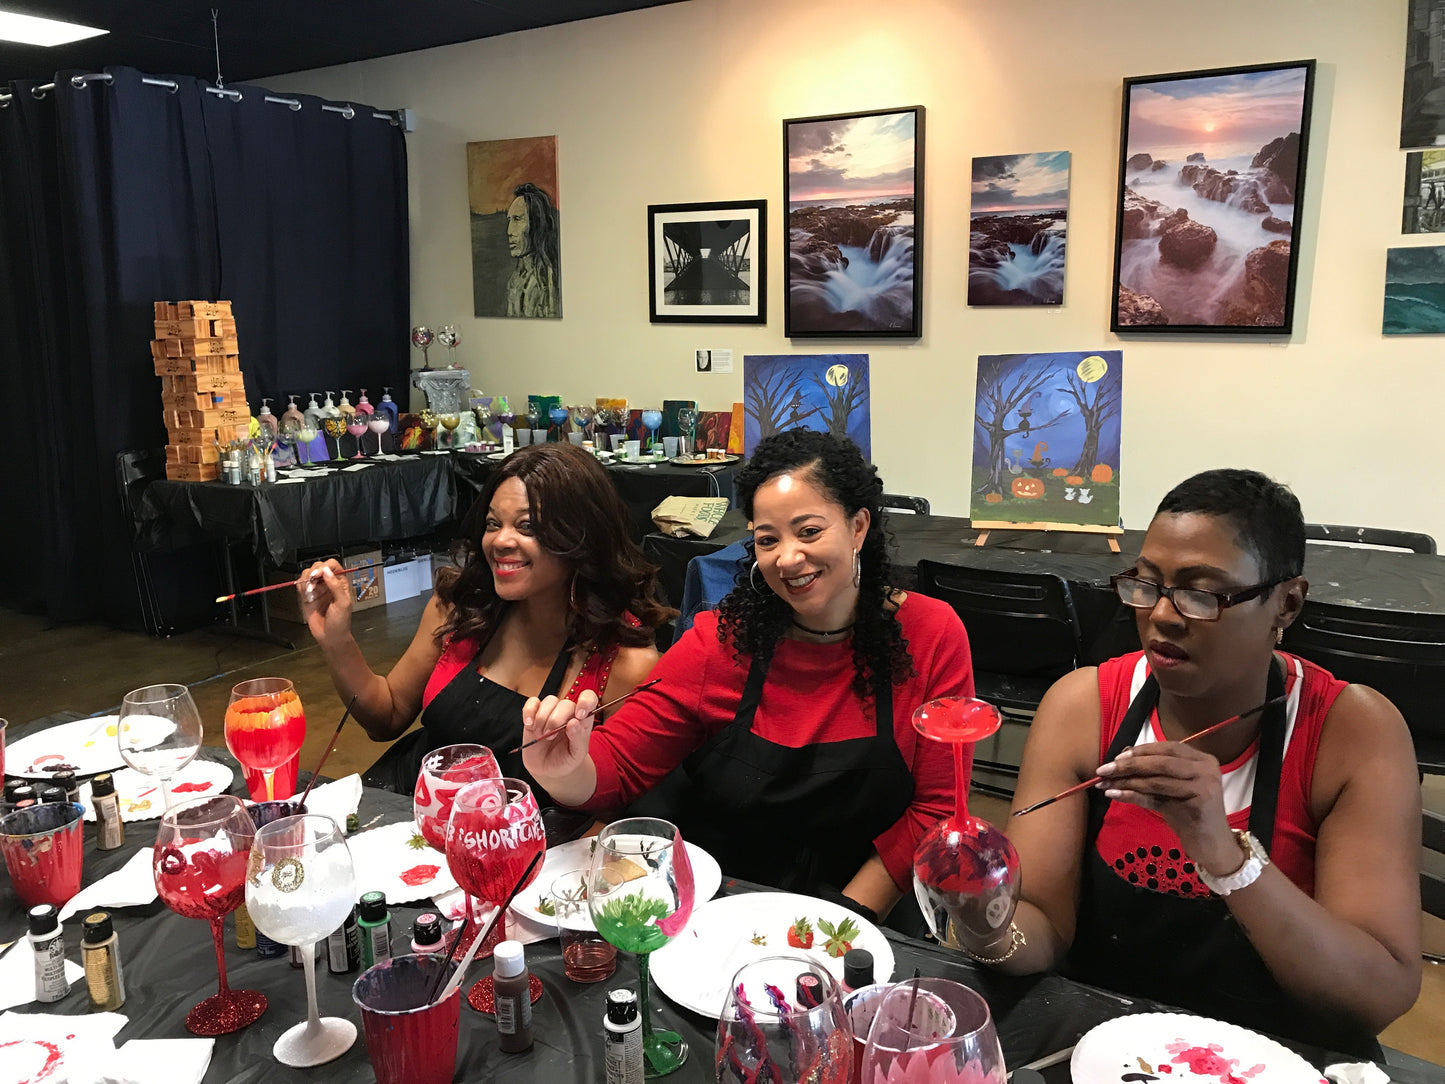 Tue, Mar 22nd, 4-6P "Paint On Glass" Private Houston Corporate Paint Party